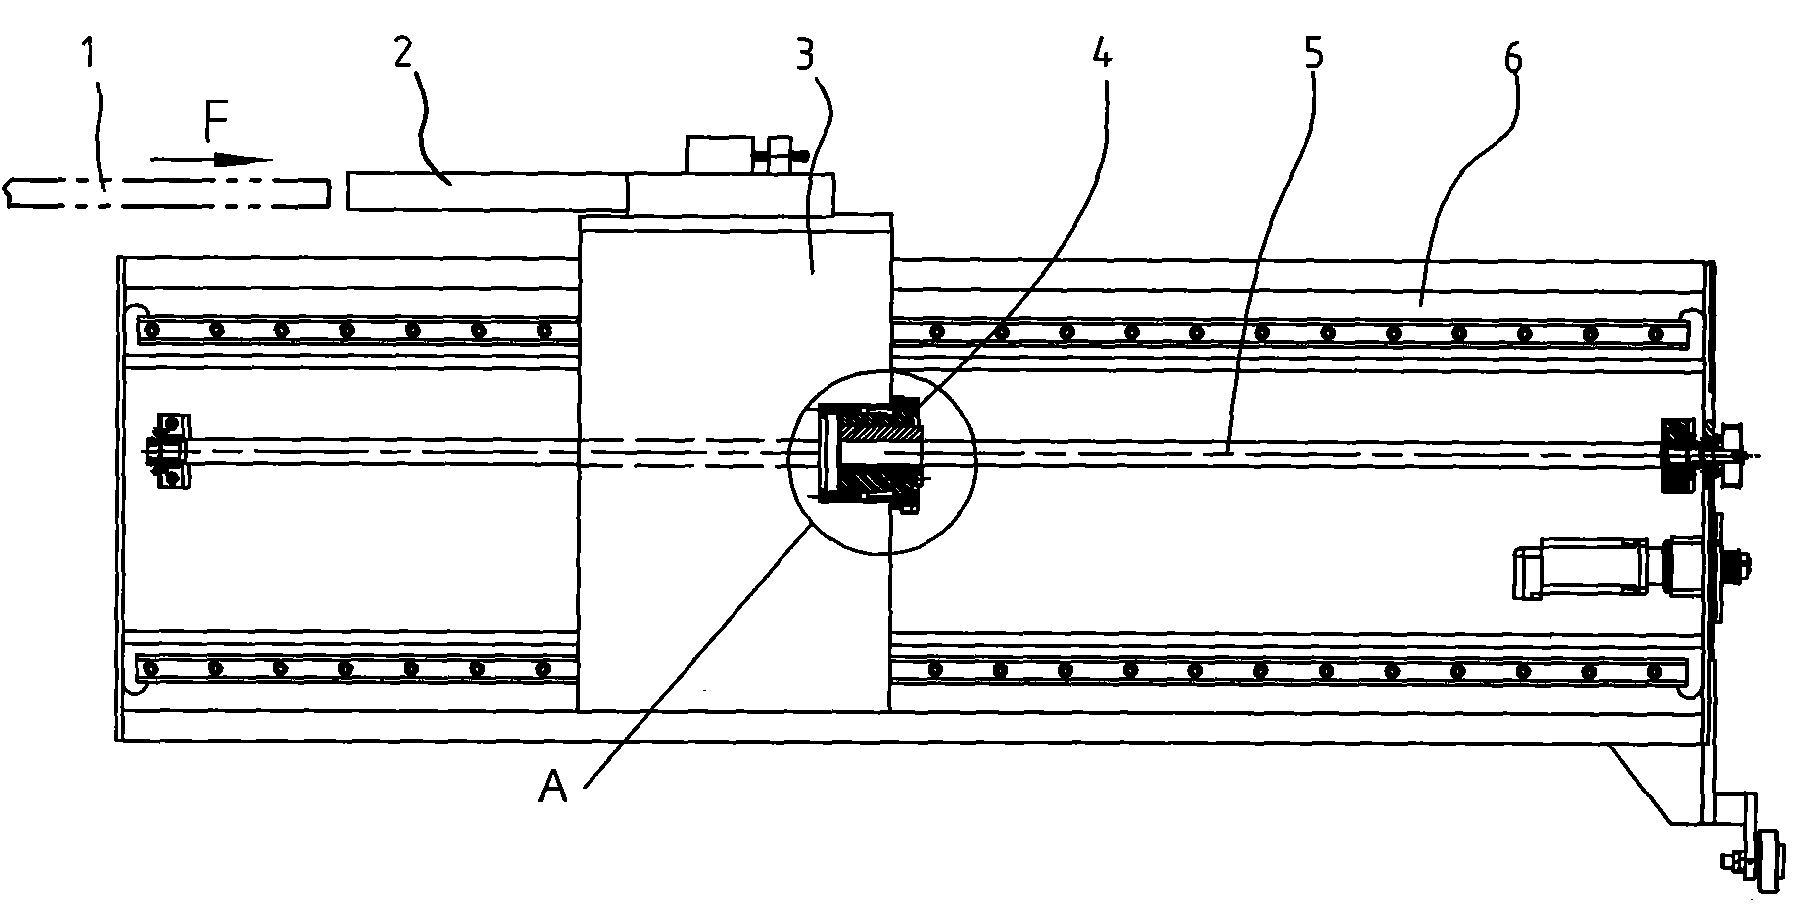 Plate positioning device on bending machine